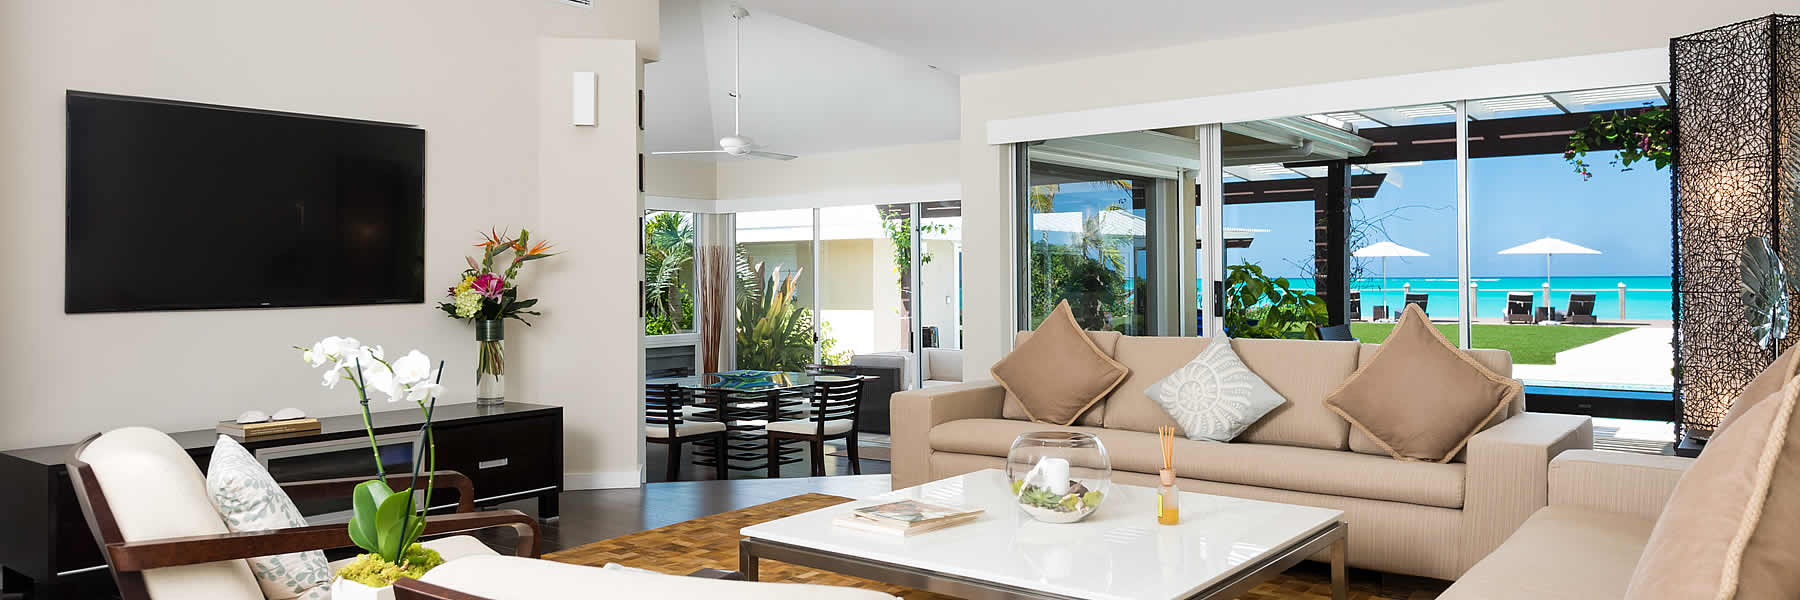 Luxury accommodations at this Private Turks & Caicos villa.